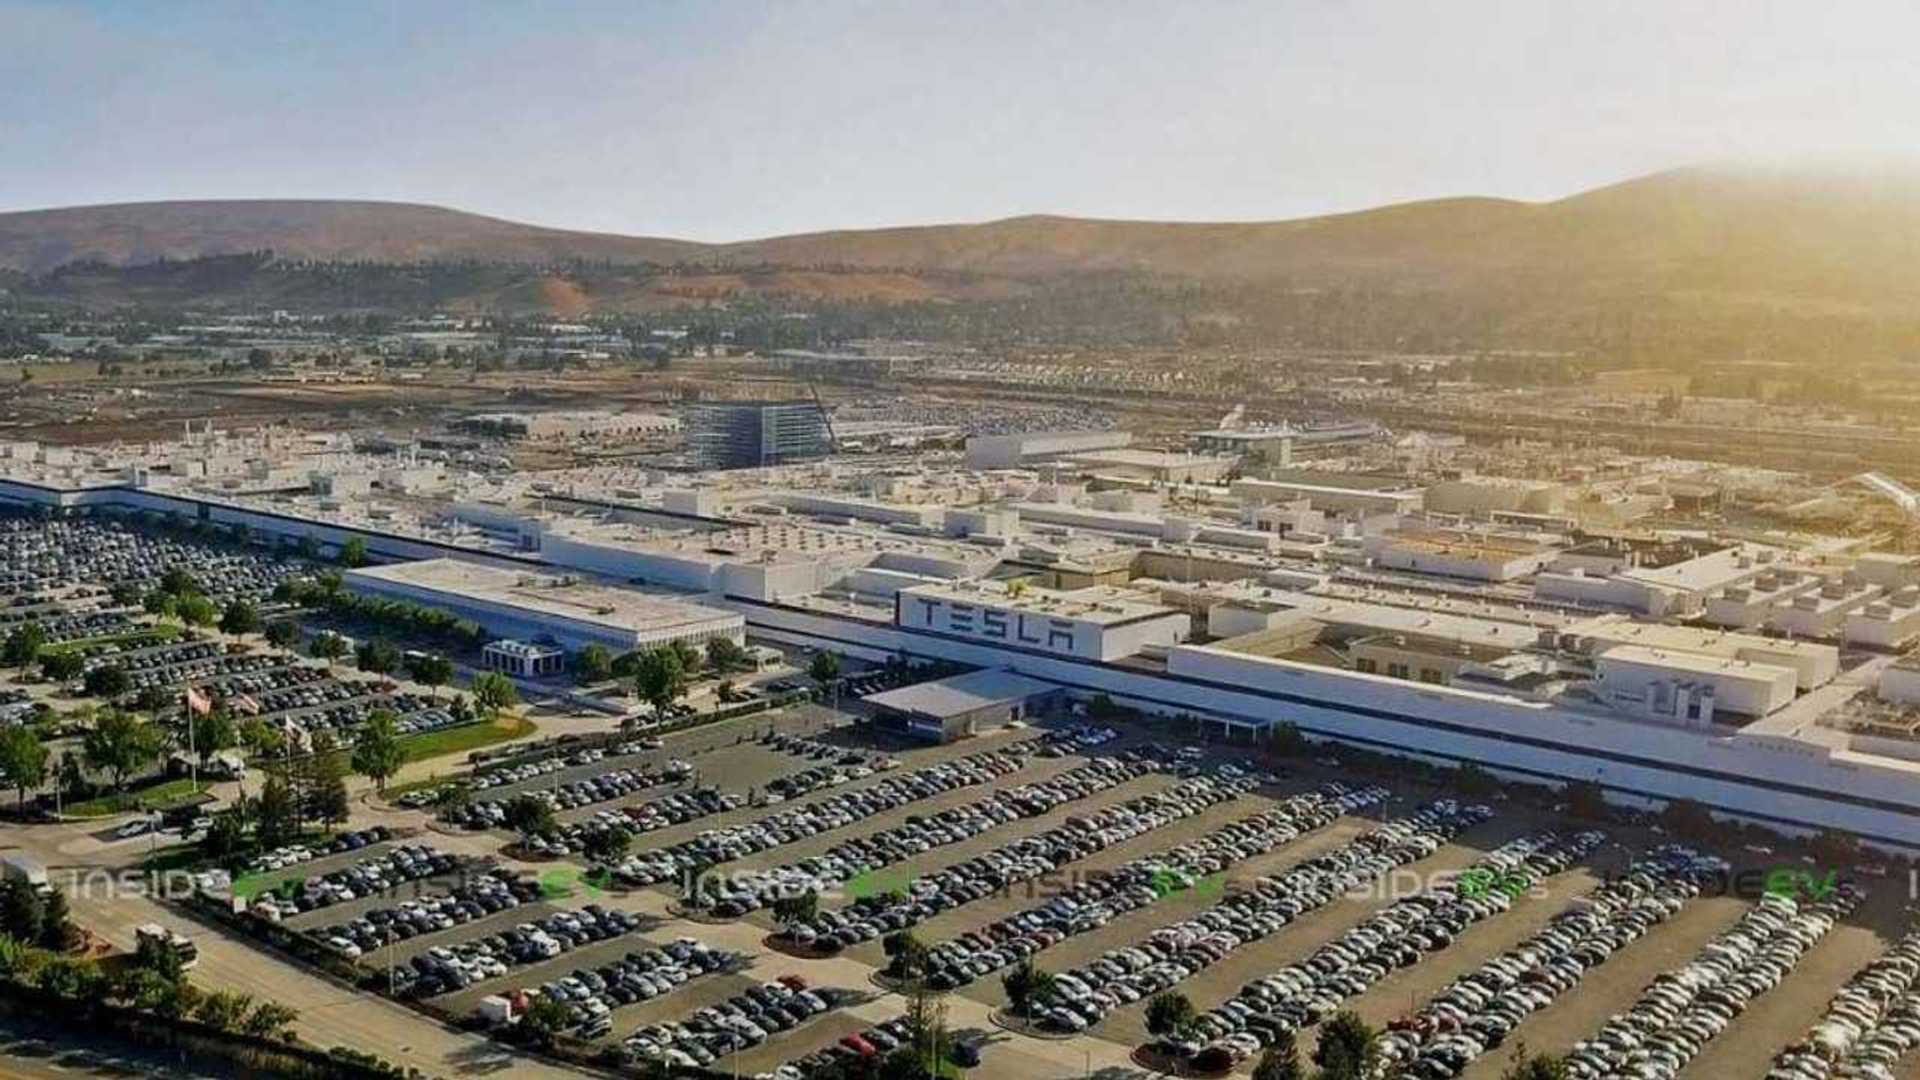 tesla's annual vehicle capacity increased to over 2.3 million